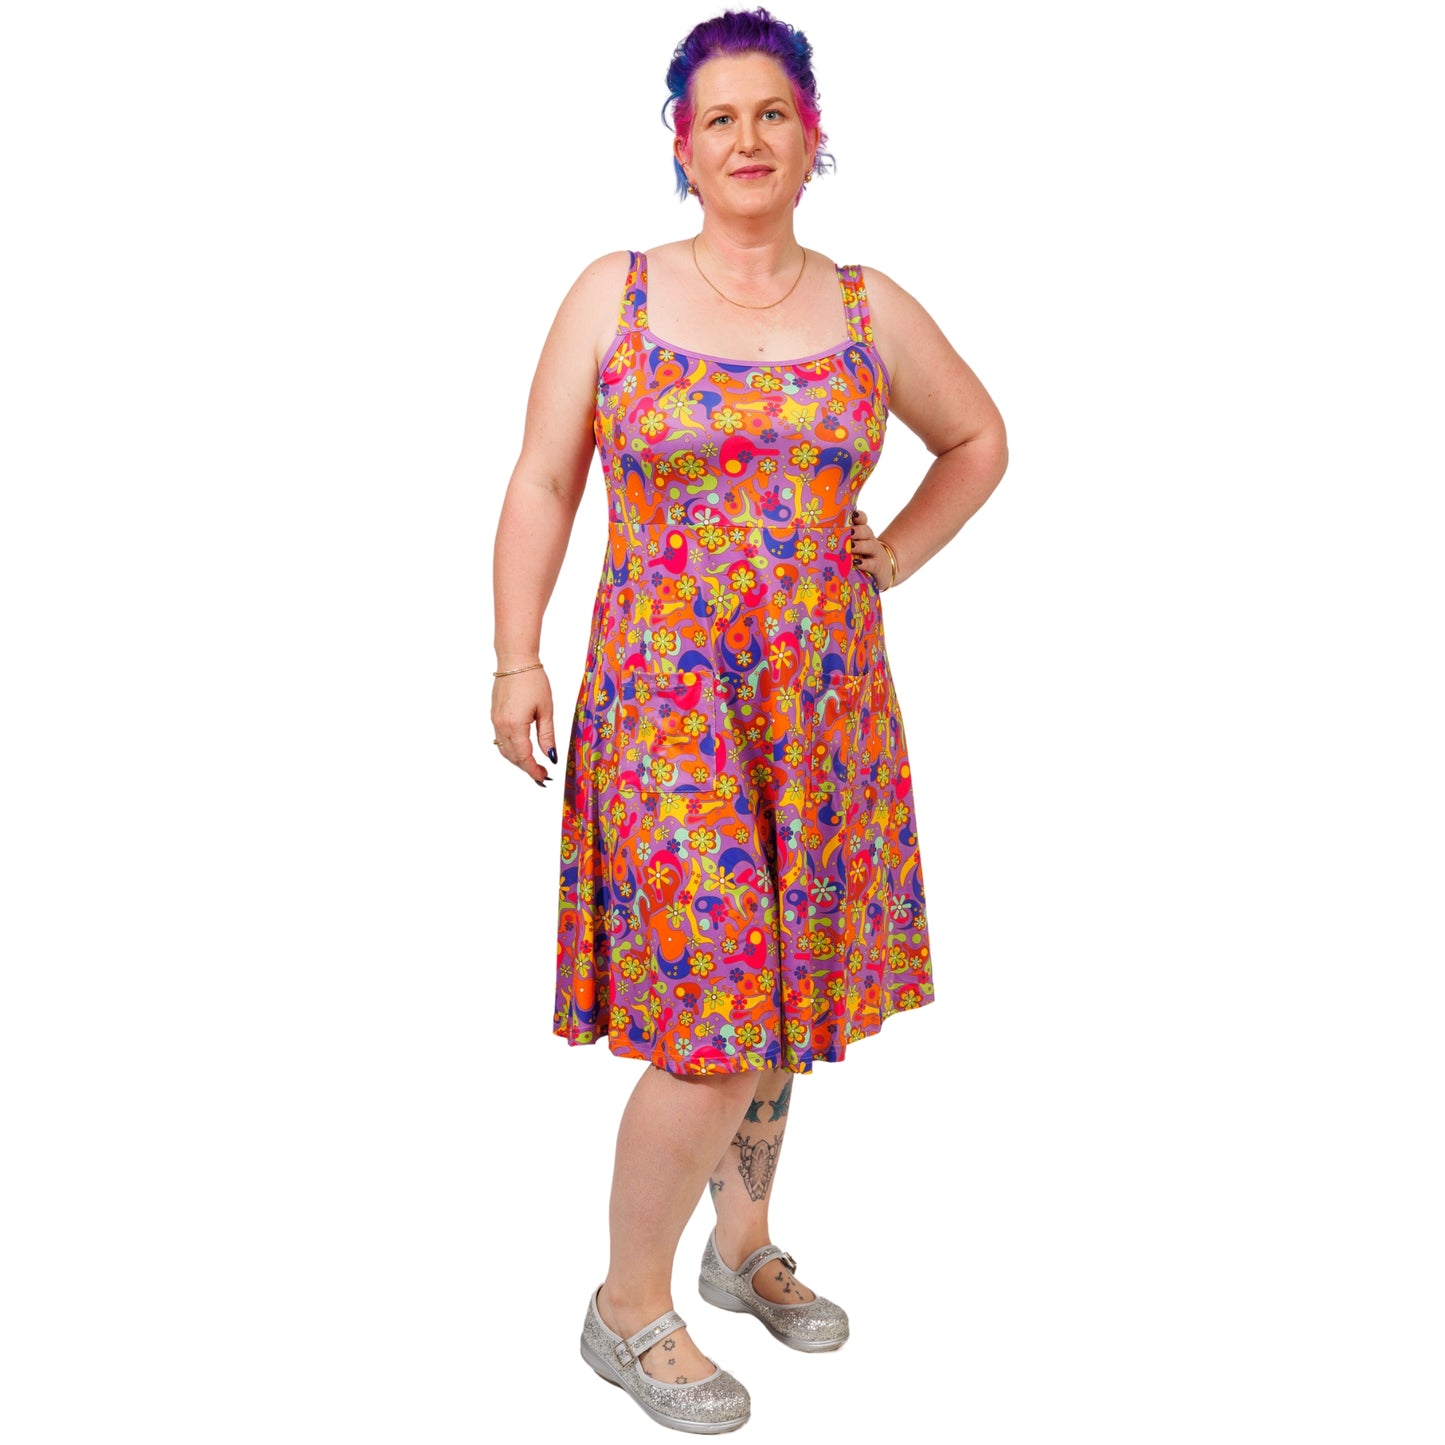 Flower Power Pinafore by RainbowsAndFairies.com.au (Psychedelic - Woodstock - Dress With Pockets - Vintage Inspired - Kitsch) - SKU: CL_PFORE_FLOPO_ORG - Pic-03